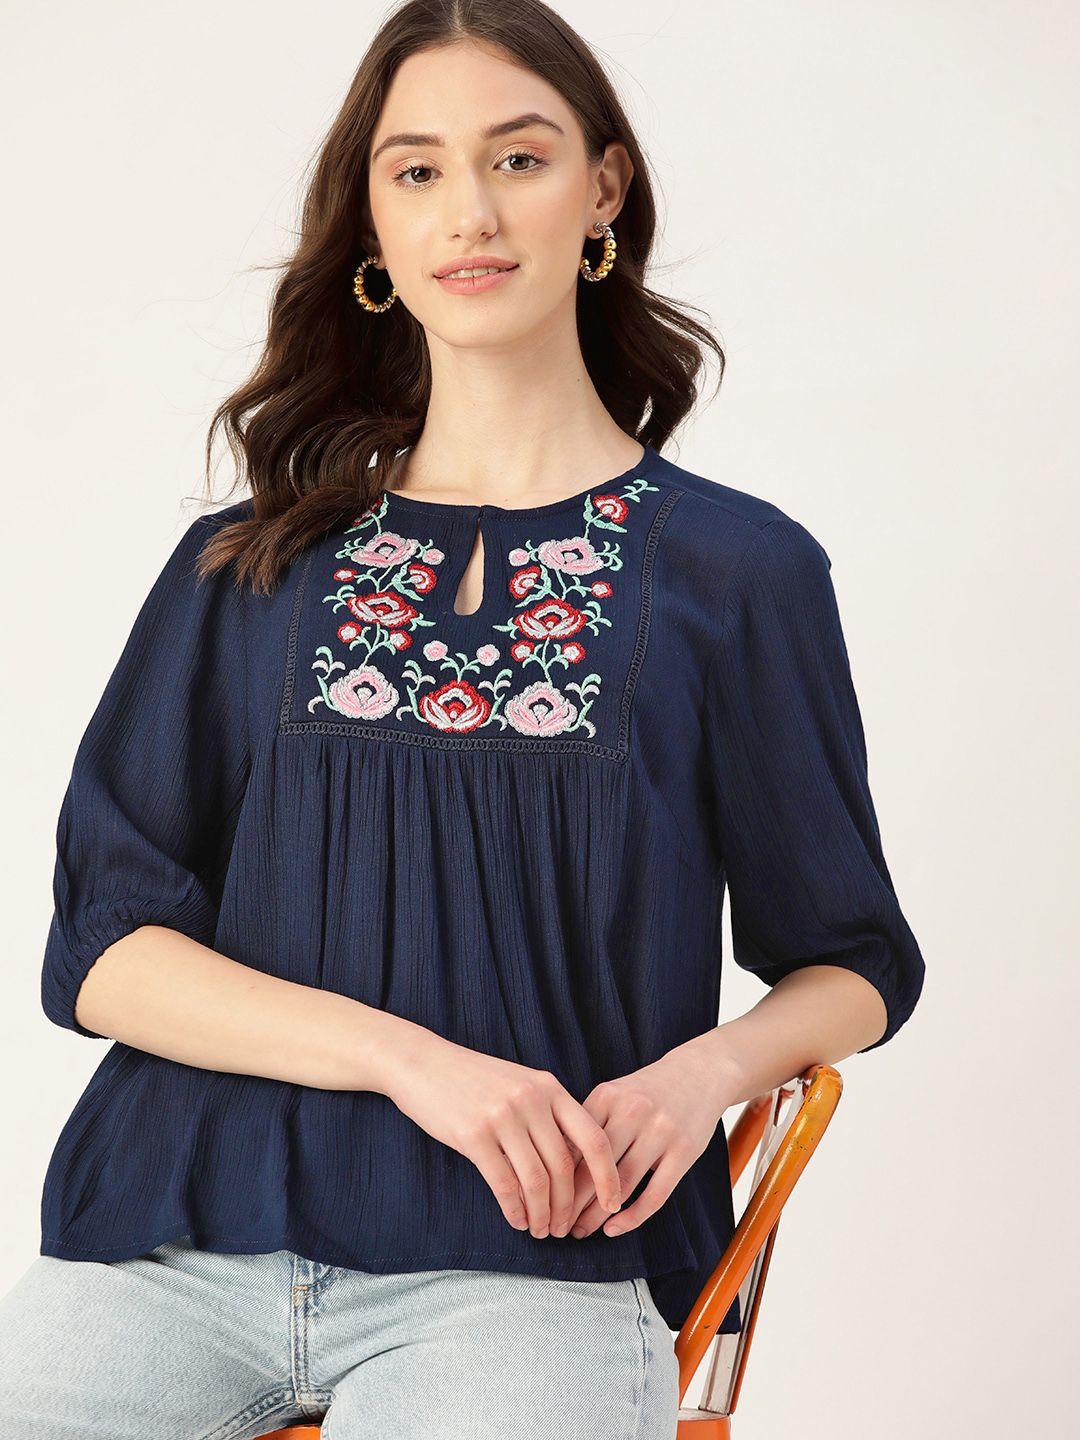 dressberry floral embroidered keyhole neck top